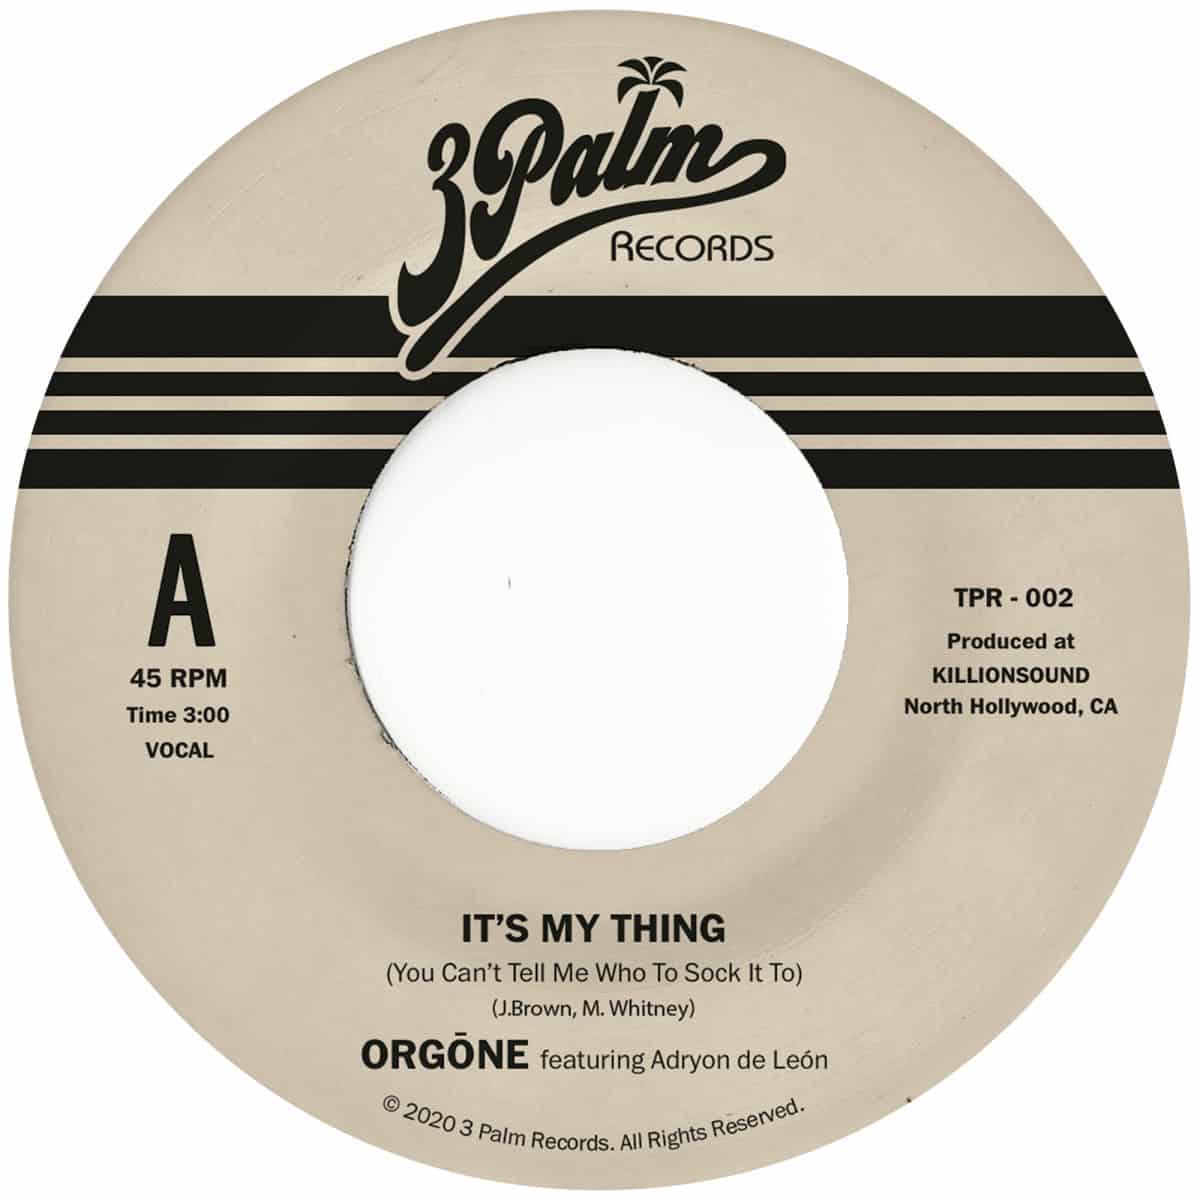 ORGONE - It's My Thing (You Can't Tell Me Who To Sock It To) - 7" - Black Vinyl